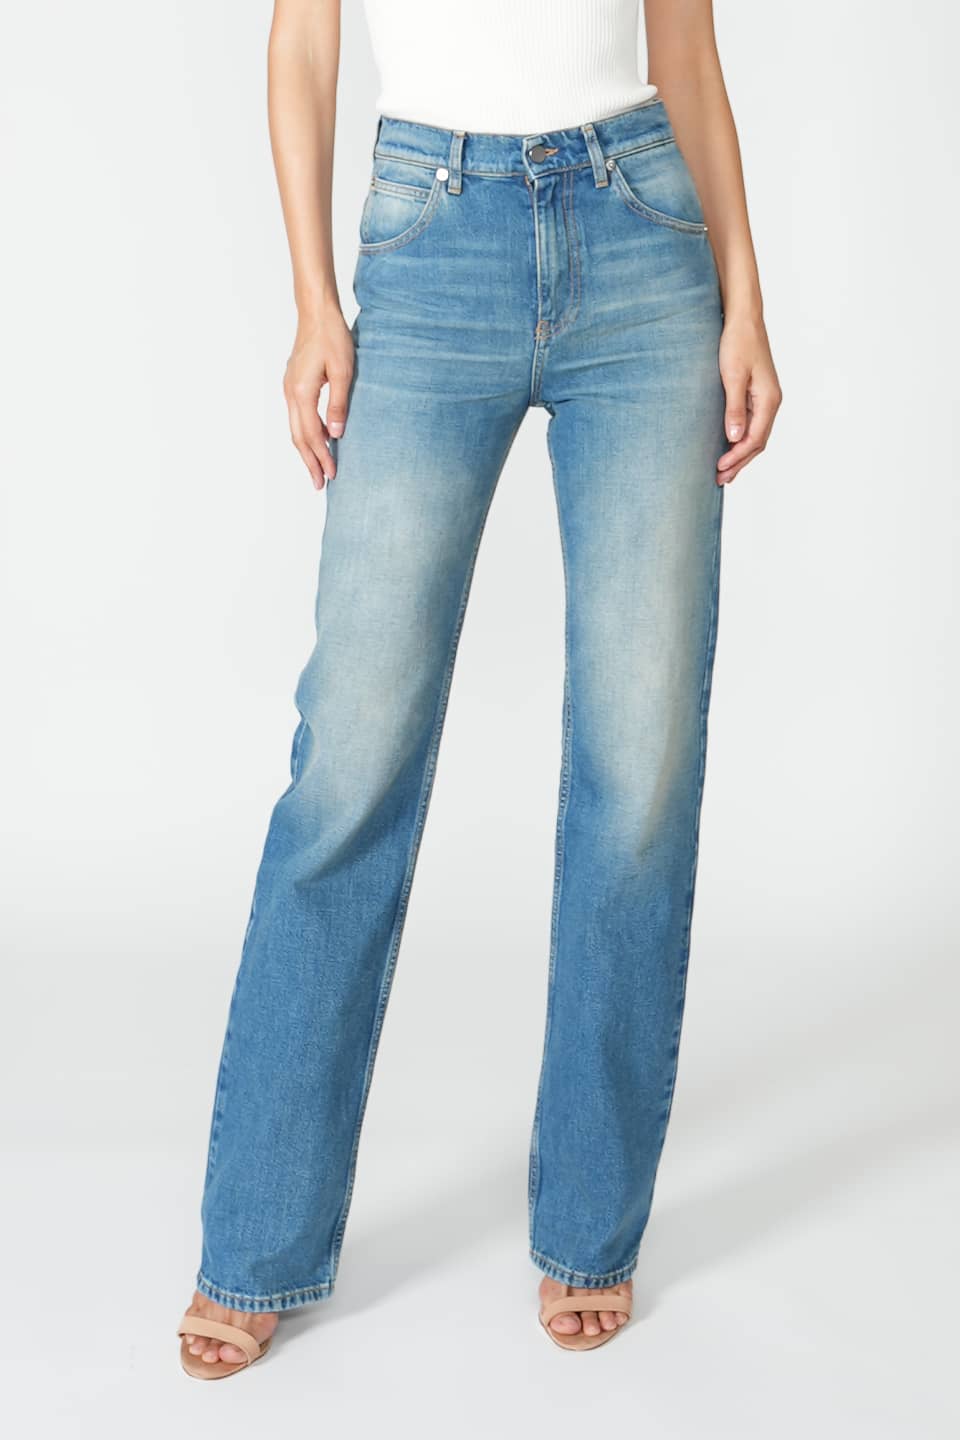 Shop online trendy Indigo Jeans from Dodo Bar Or Fashion designer. Product gallery 1